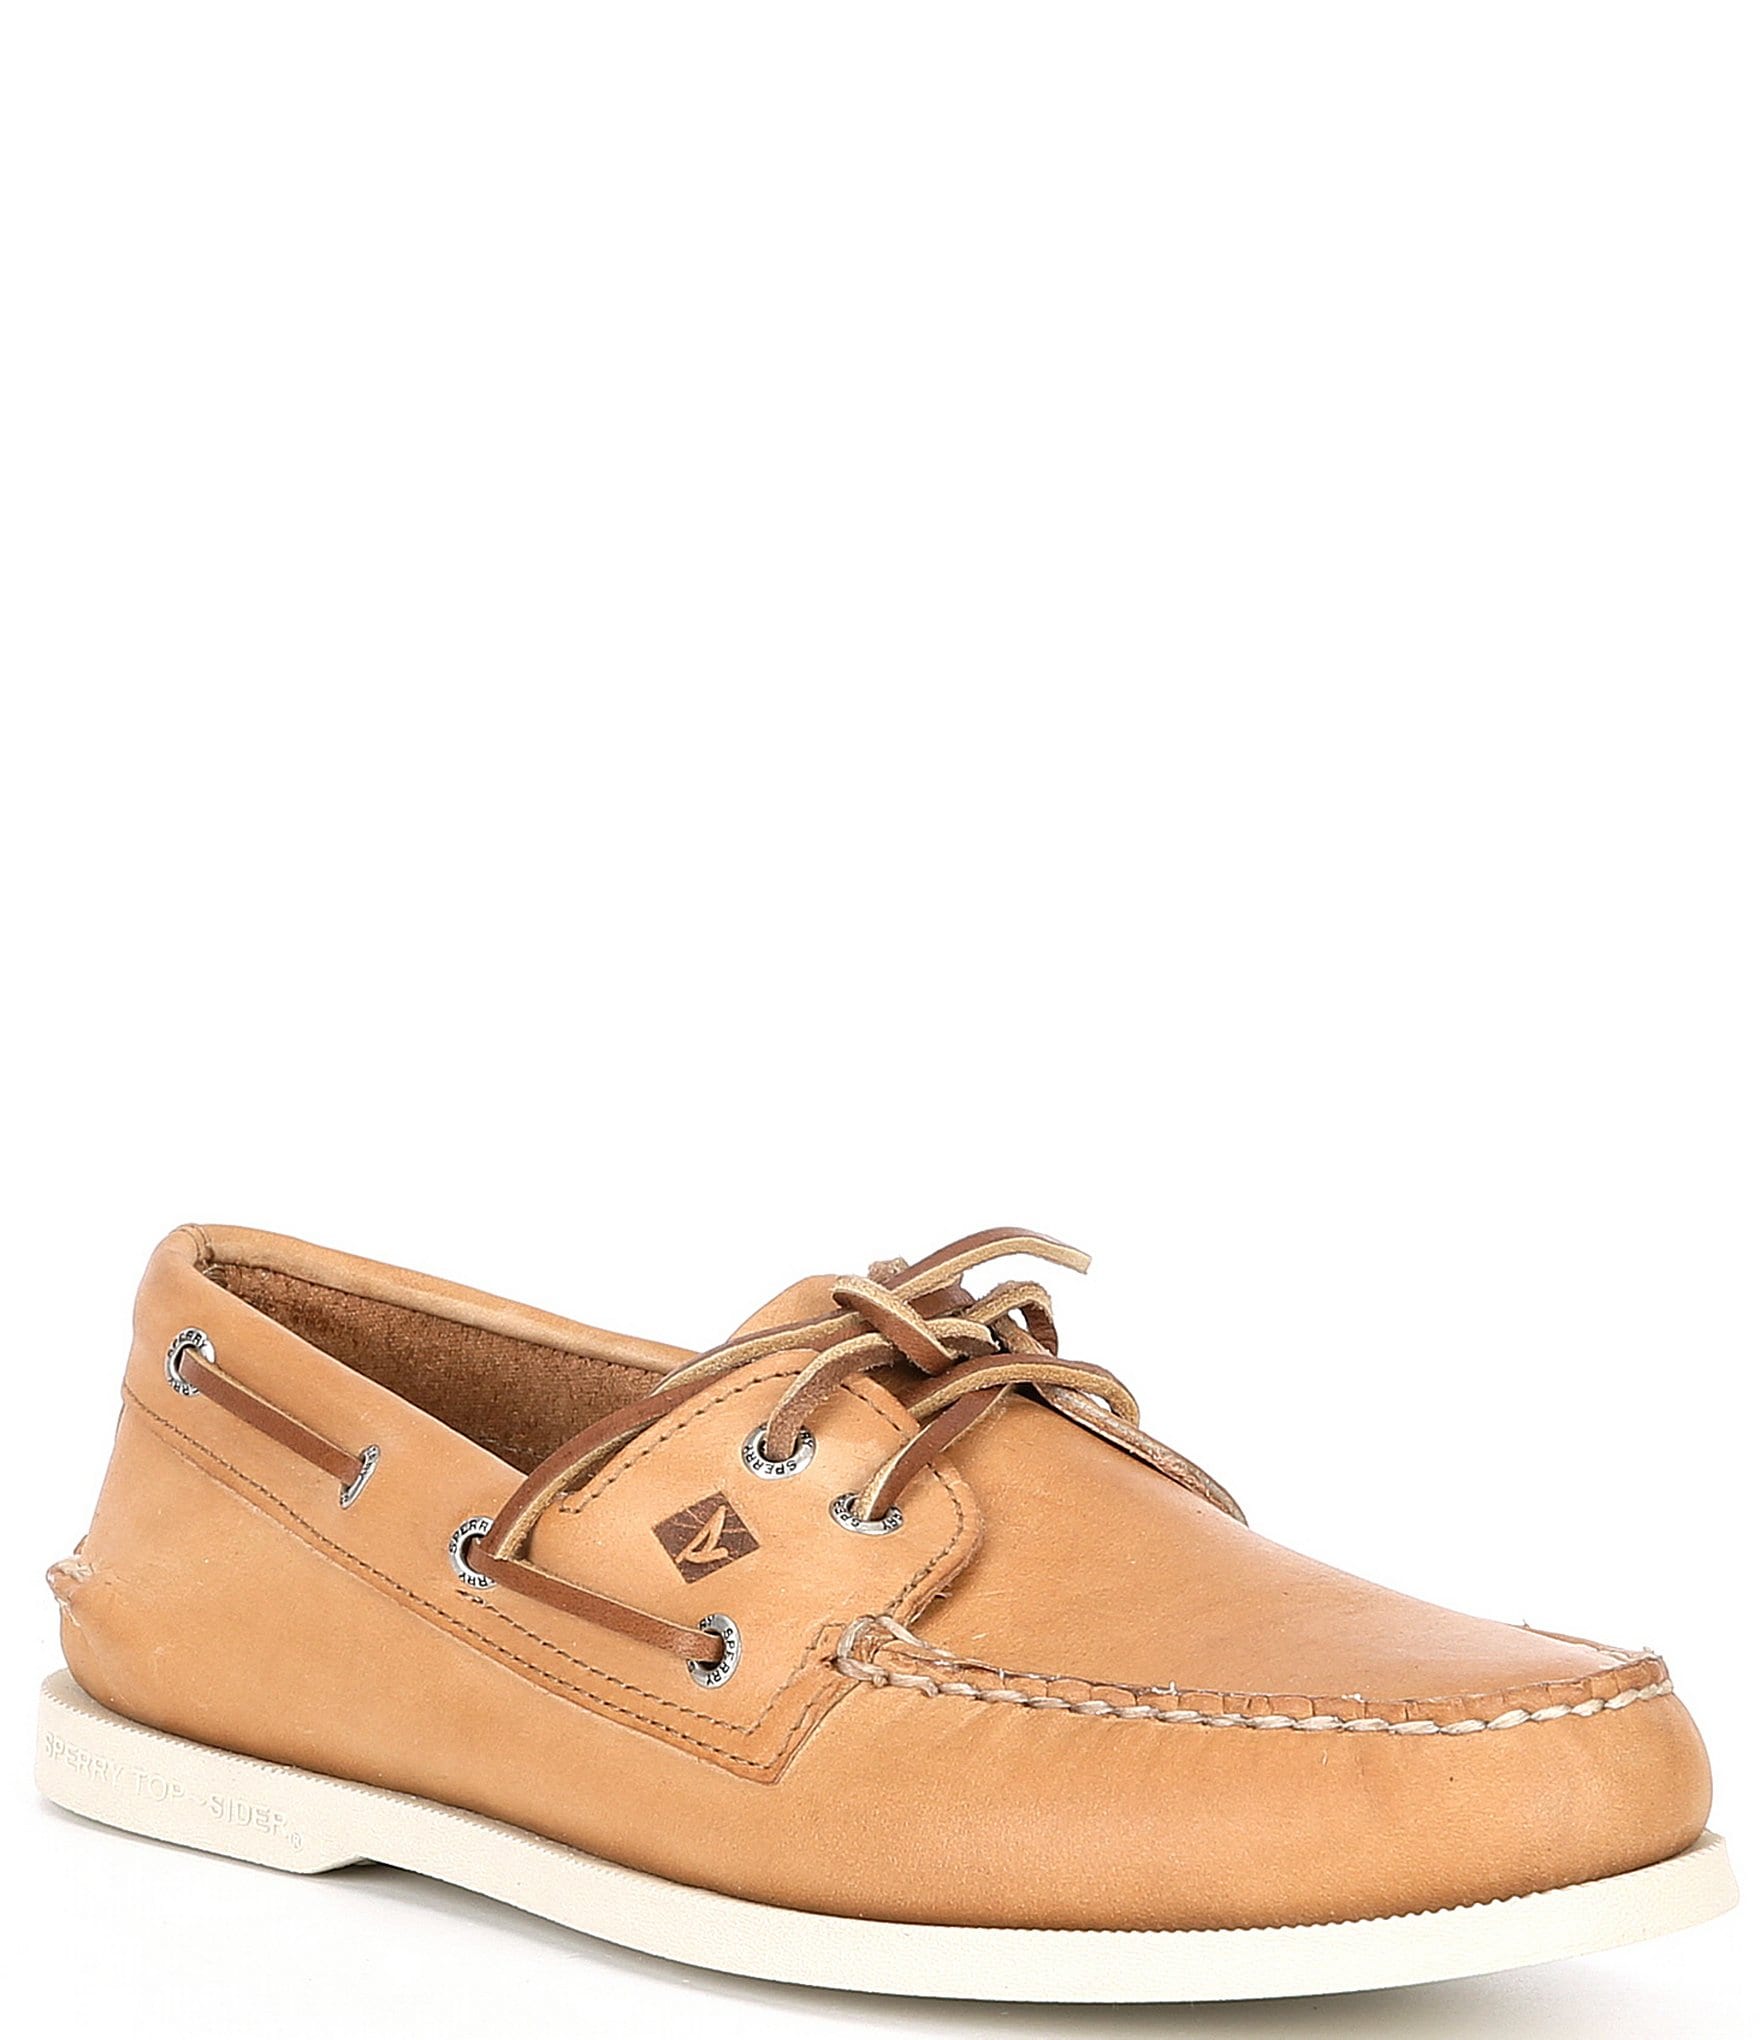 Sperry Men's Top-Sider Authentic Original 2-Eye Leather Boat Shoes |  Dillard's